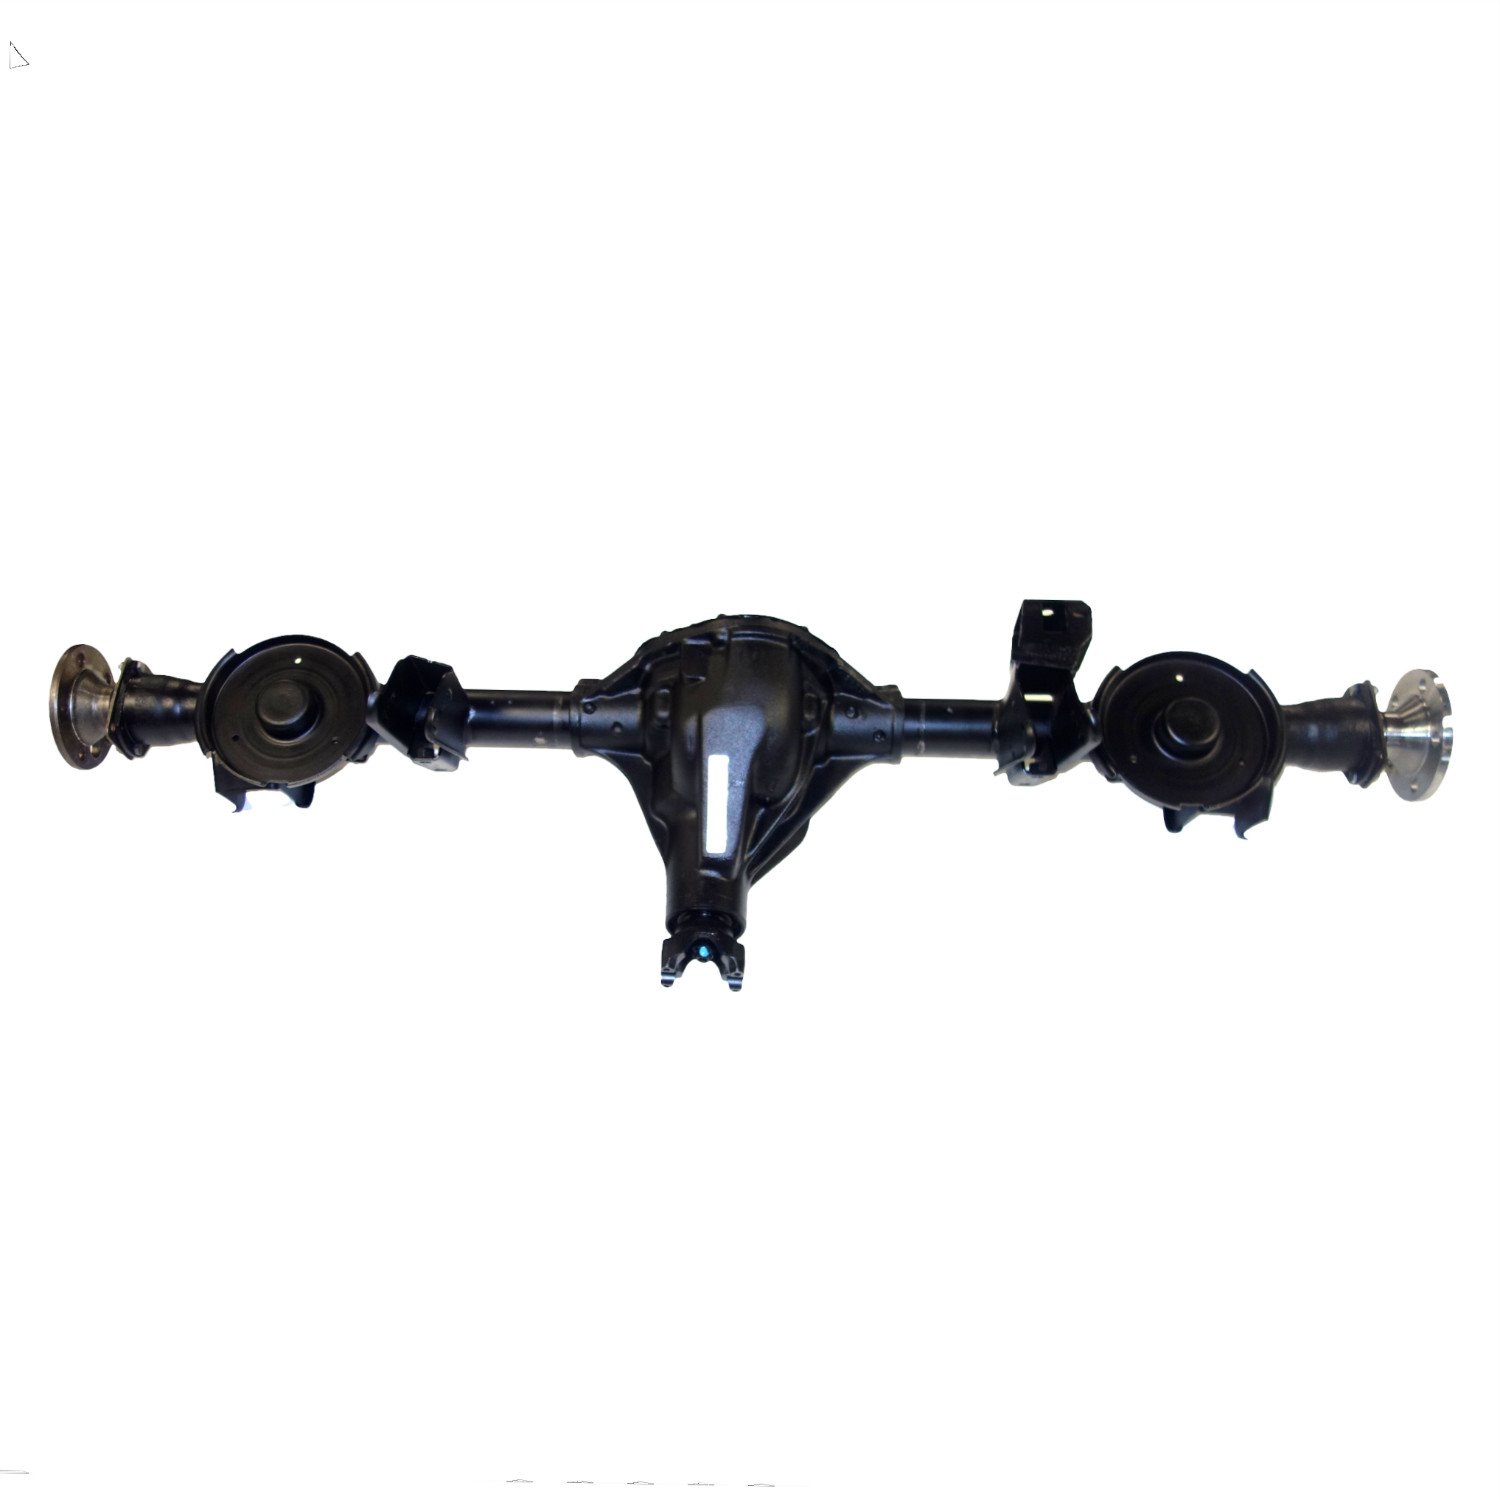 Remanufactured Complete Axle Assembly for Dana 44 03-06 Wrangler 3.73 , Disc Brakes